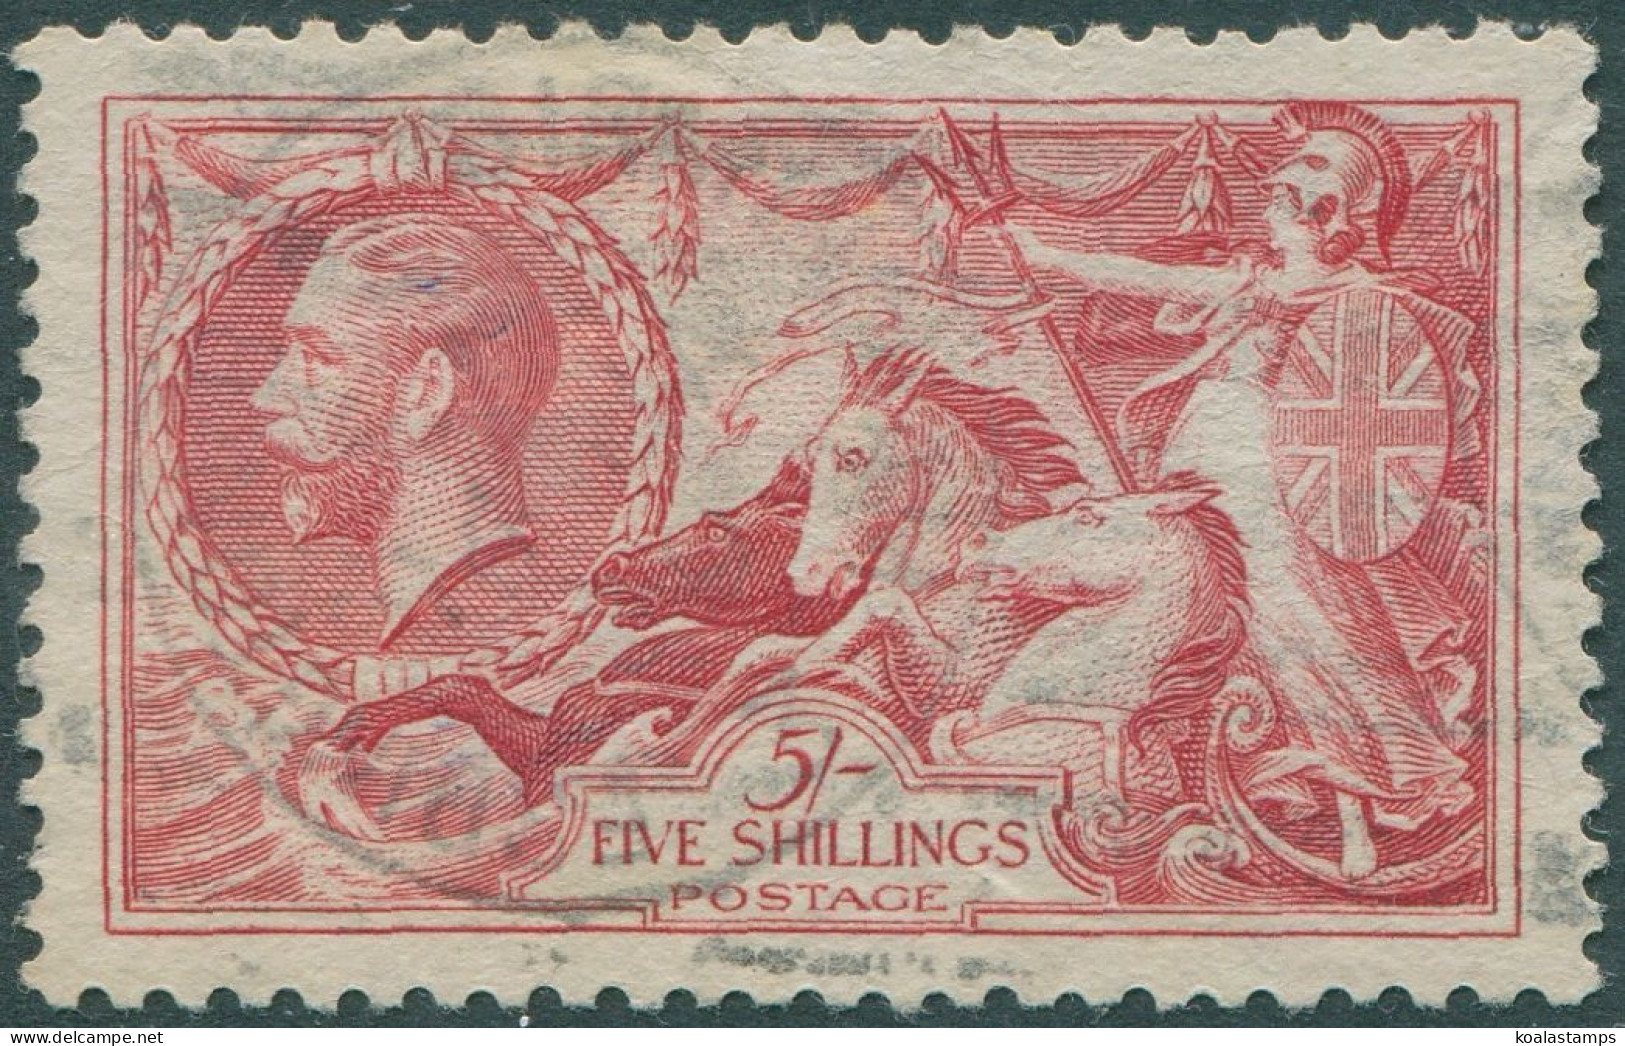 Great Britain 1934 SG451 5/- Bright Rose-red KGV Sea-horses Re-engraved #1 FU - Unclassified